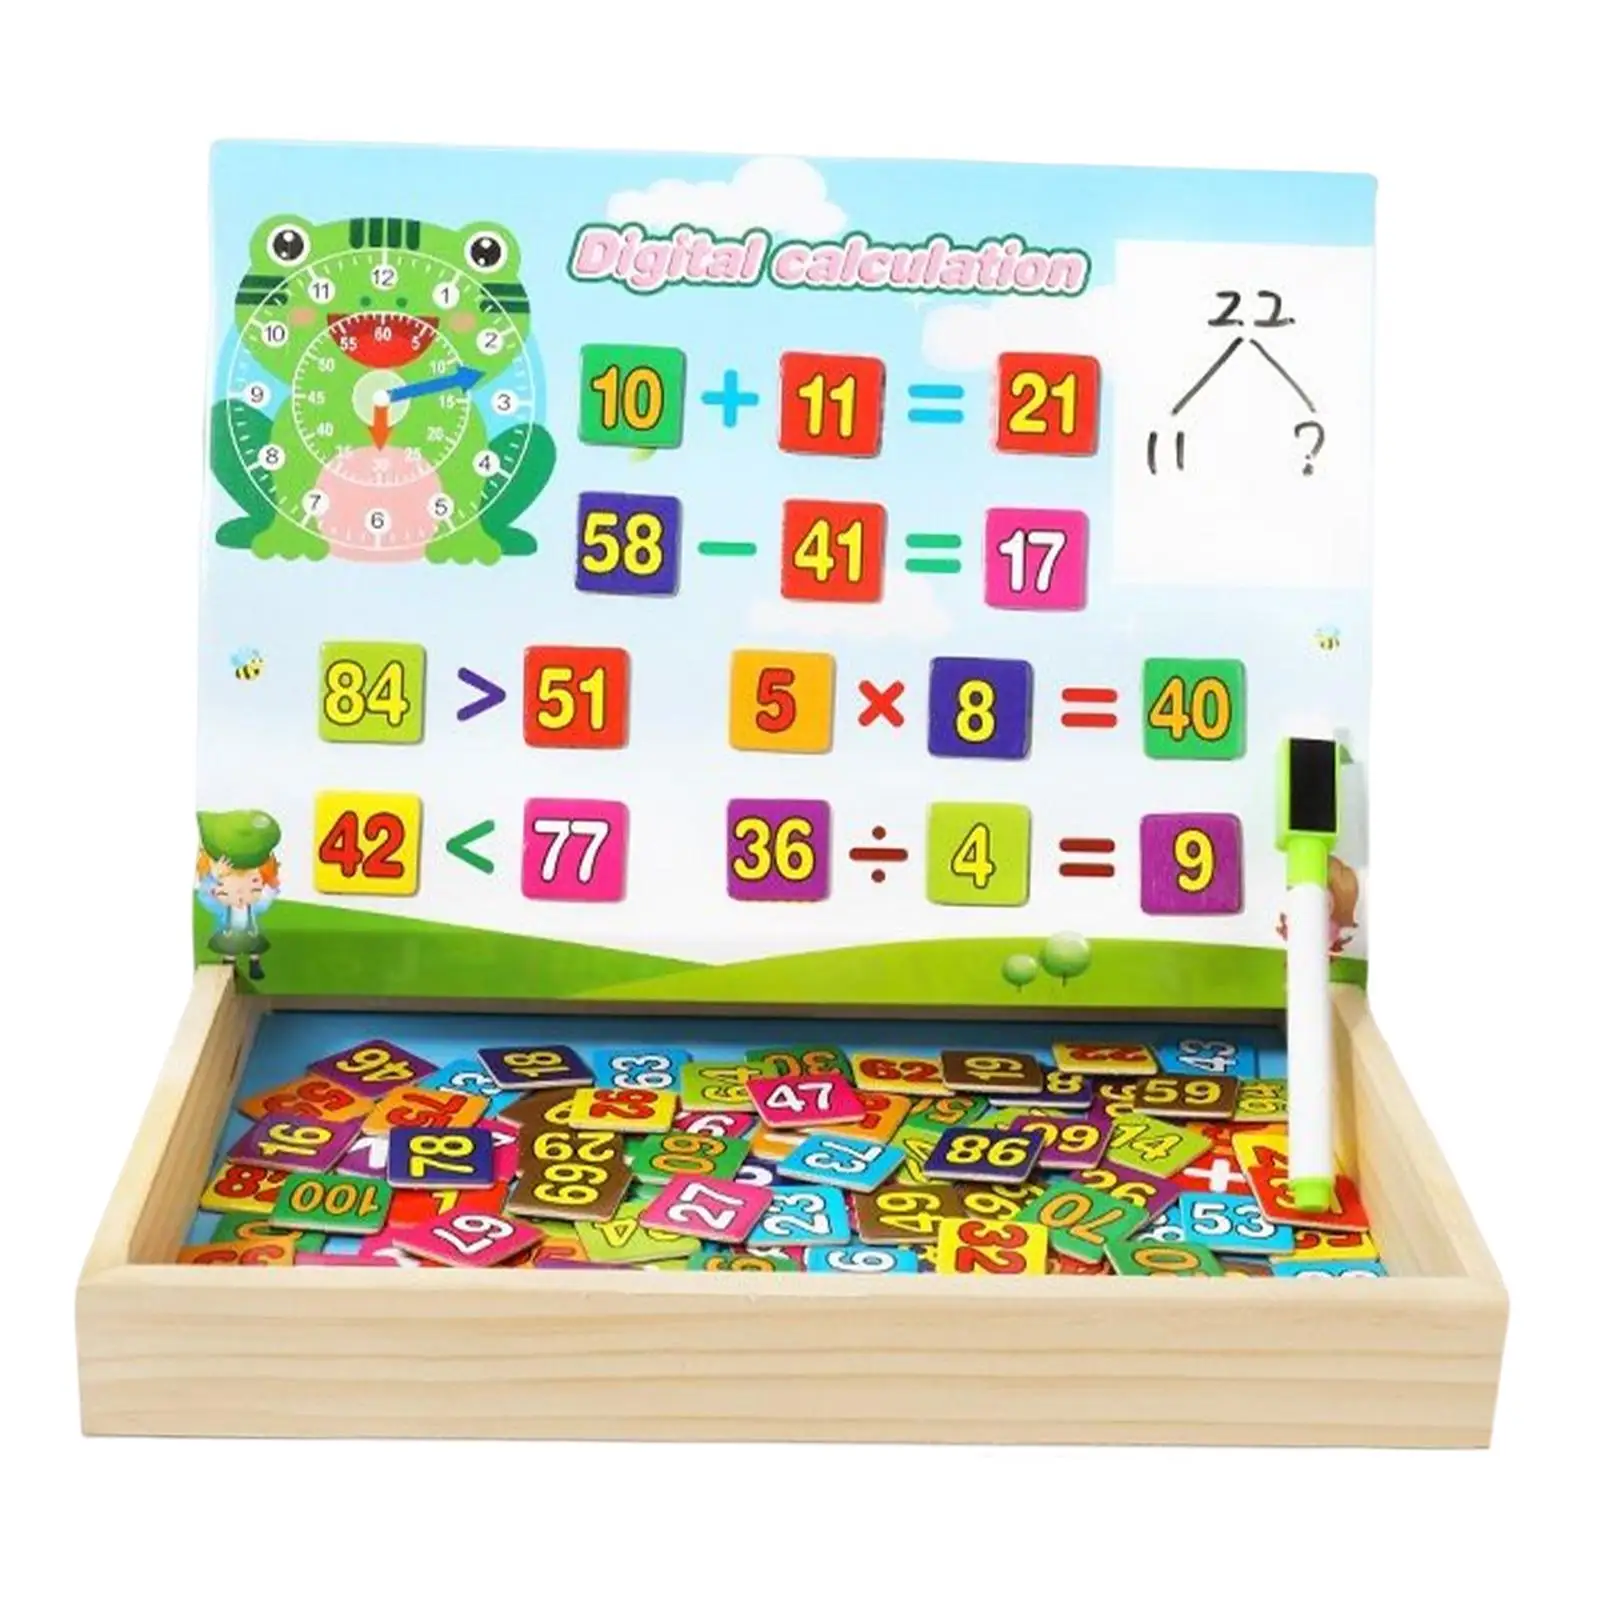  Math Toys Kids Addition and Subtraction Educational Toy Accessories Teaching Tool Premium Material for Children